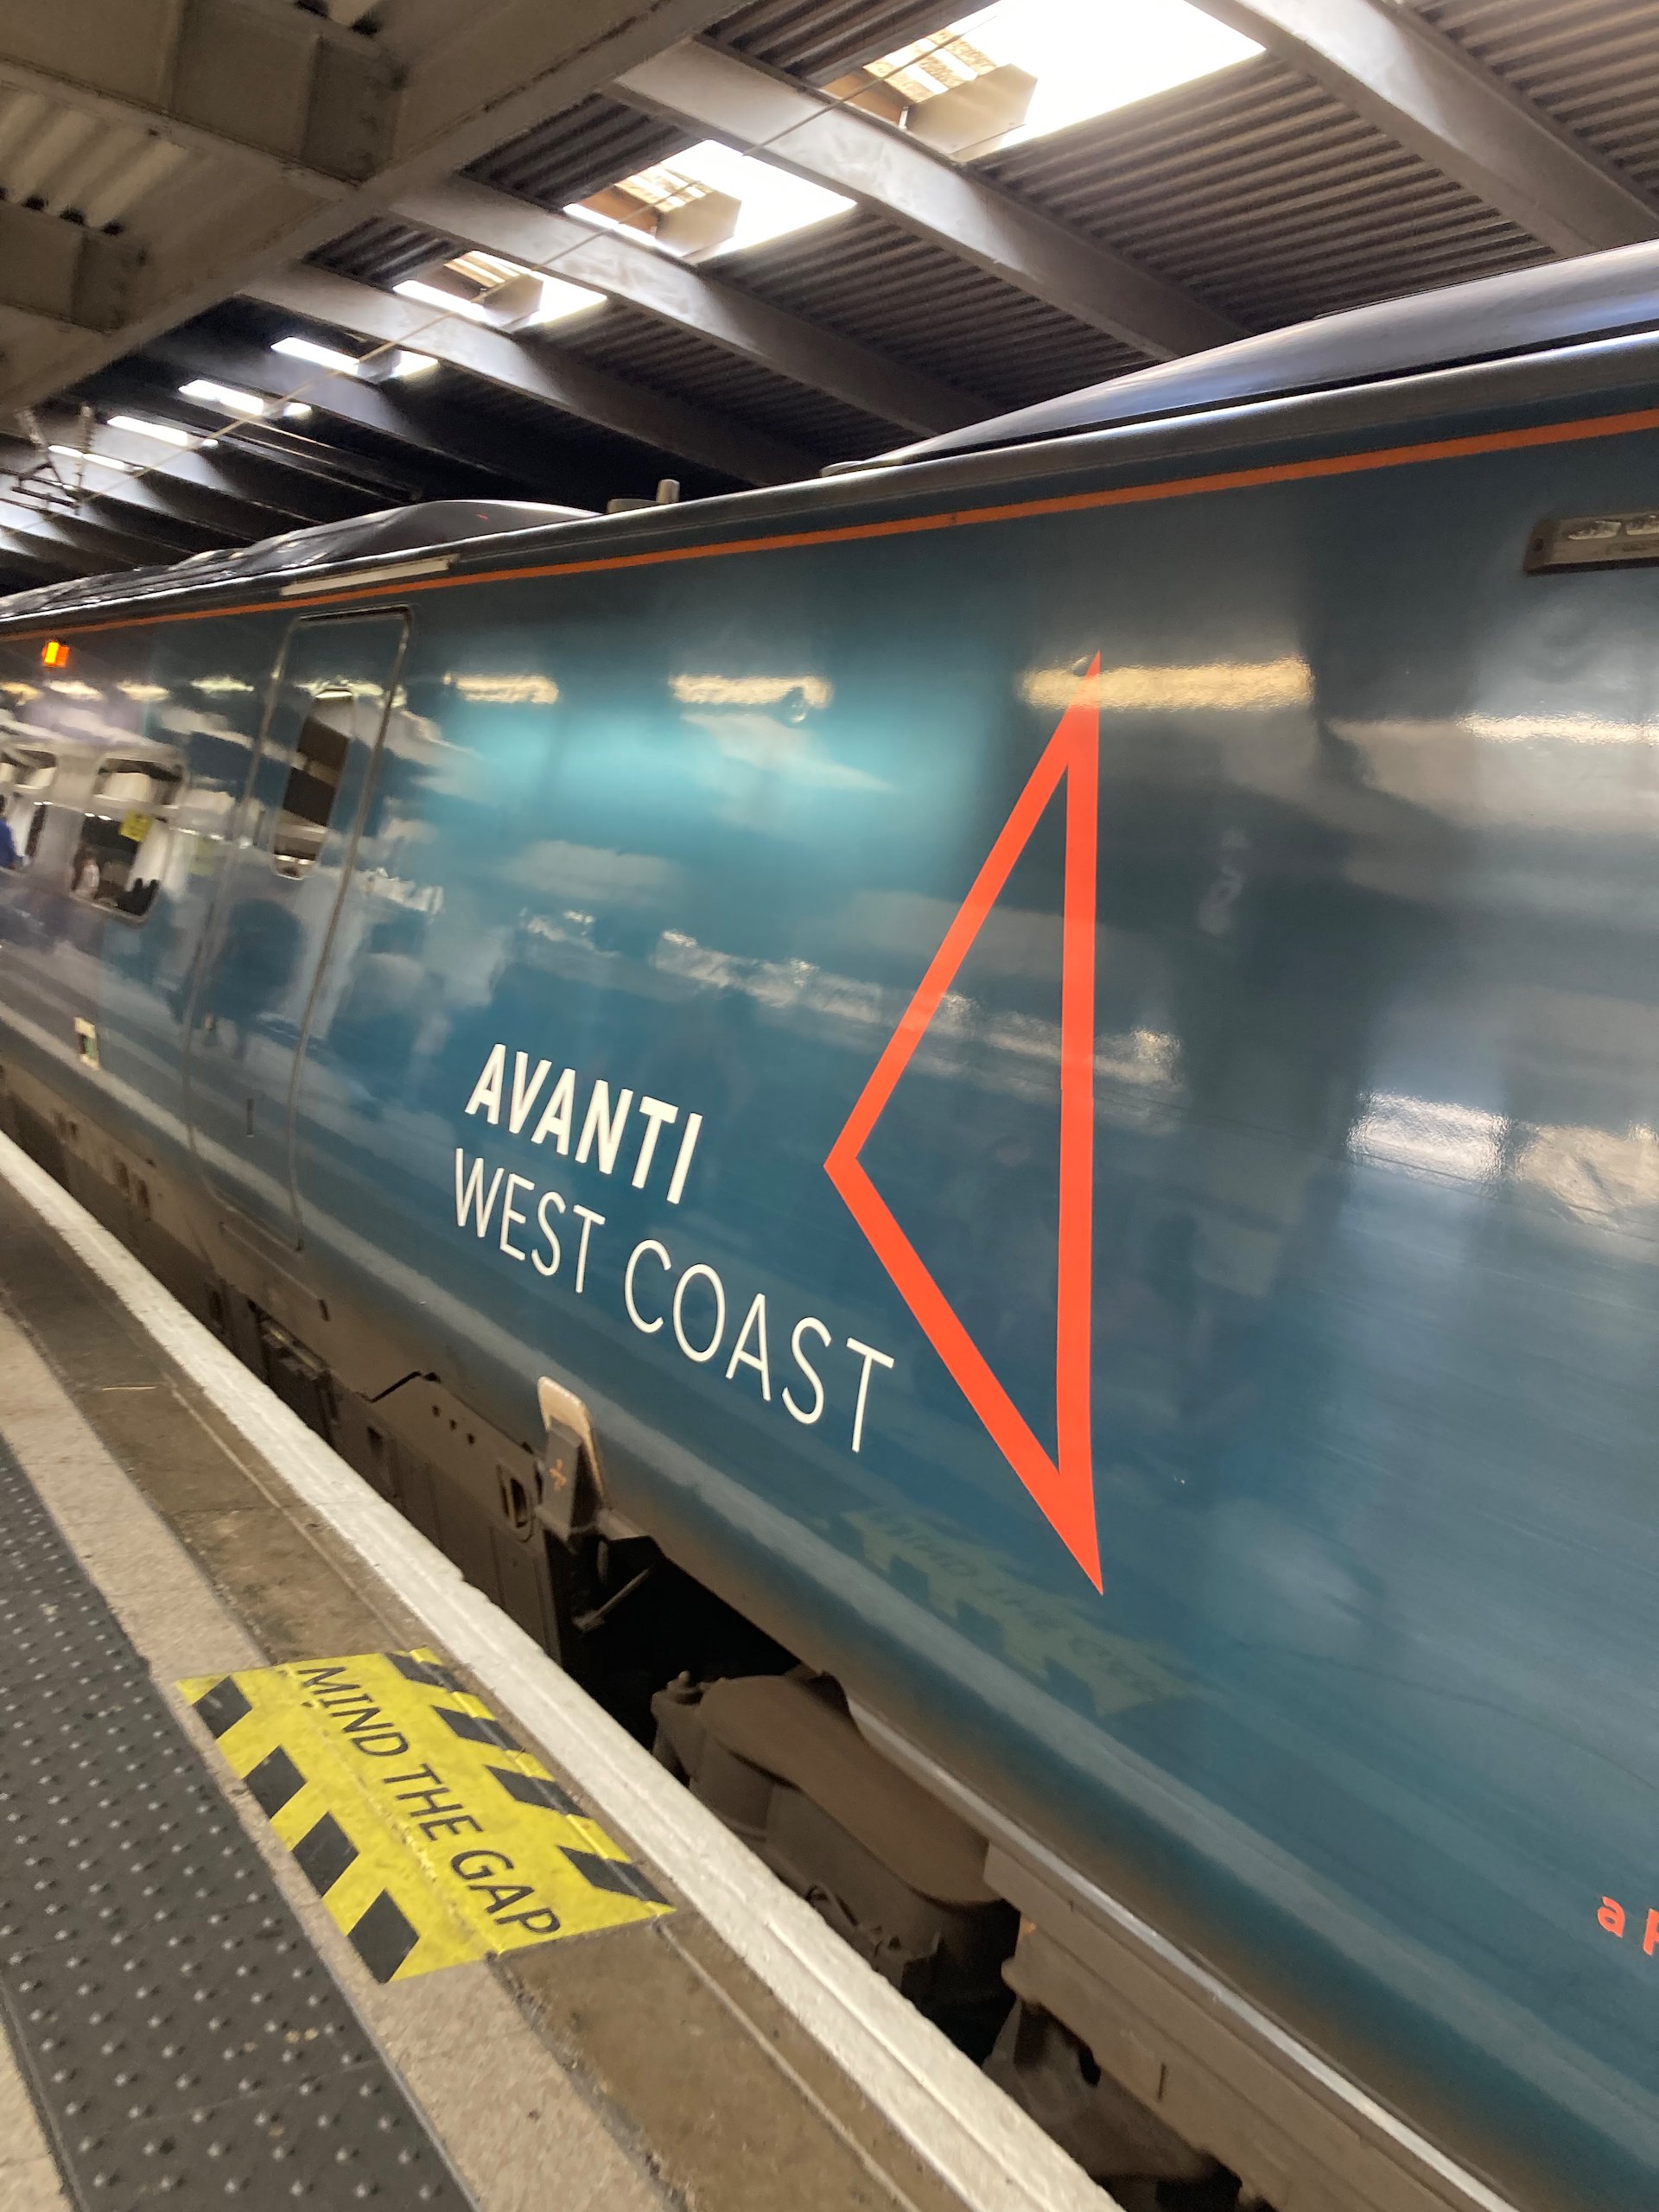  Avanti was new to me, but seemed OK and not much different from UK trains I’ve been on in the past. 